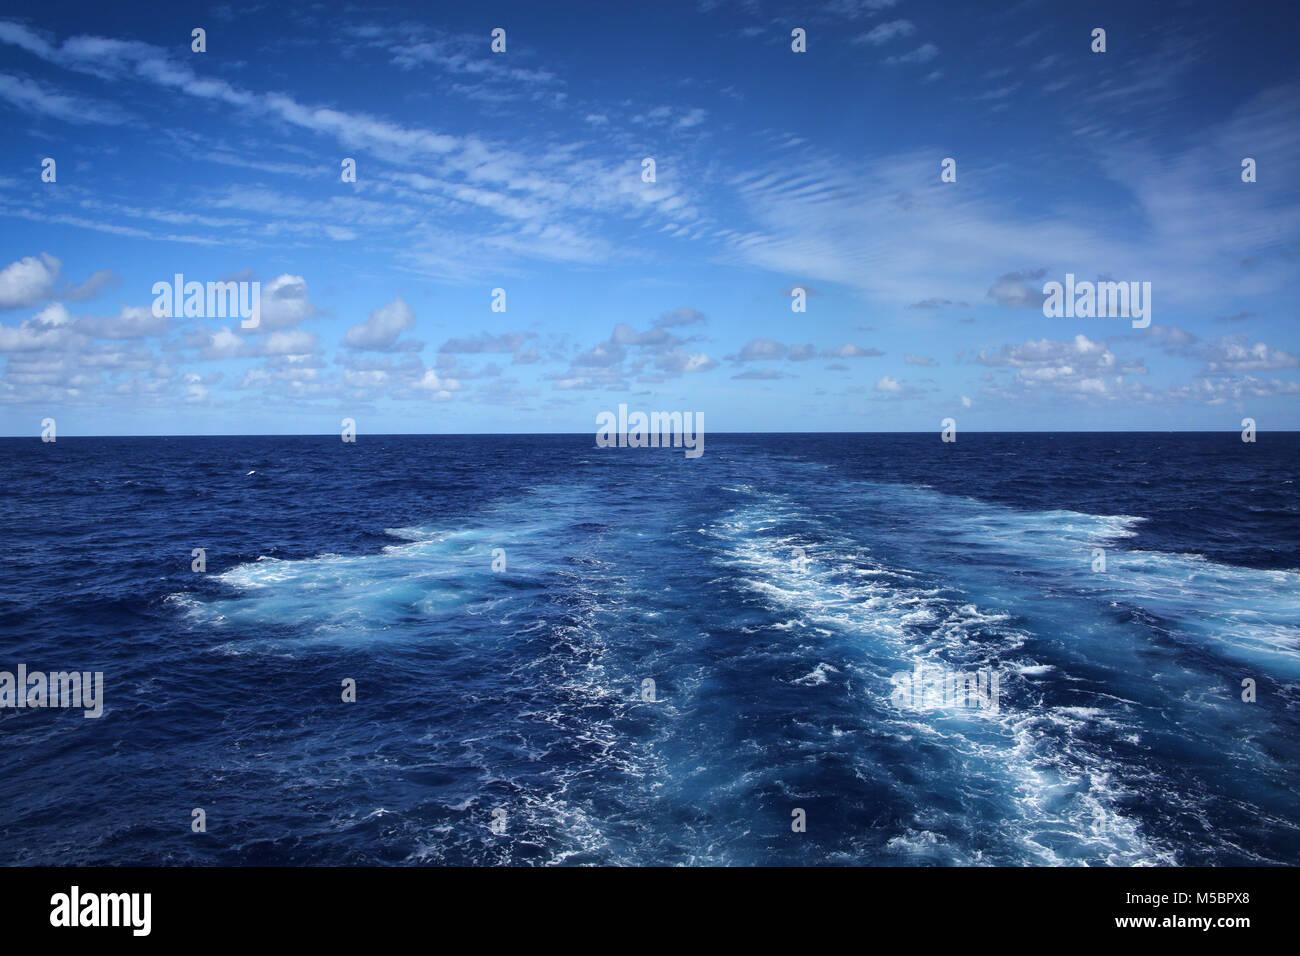 Wake of a ship across the Atlantic Ocean, on a beautiful day. Stock Photo